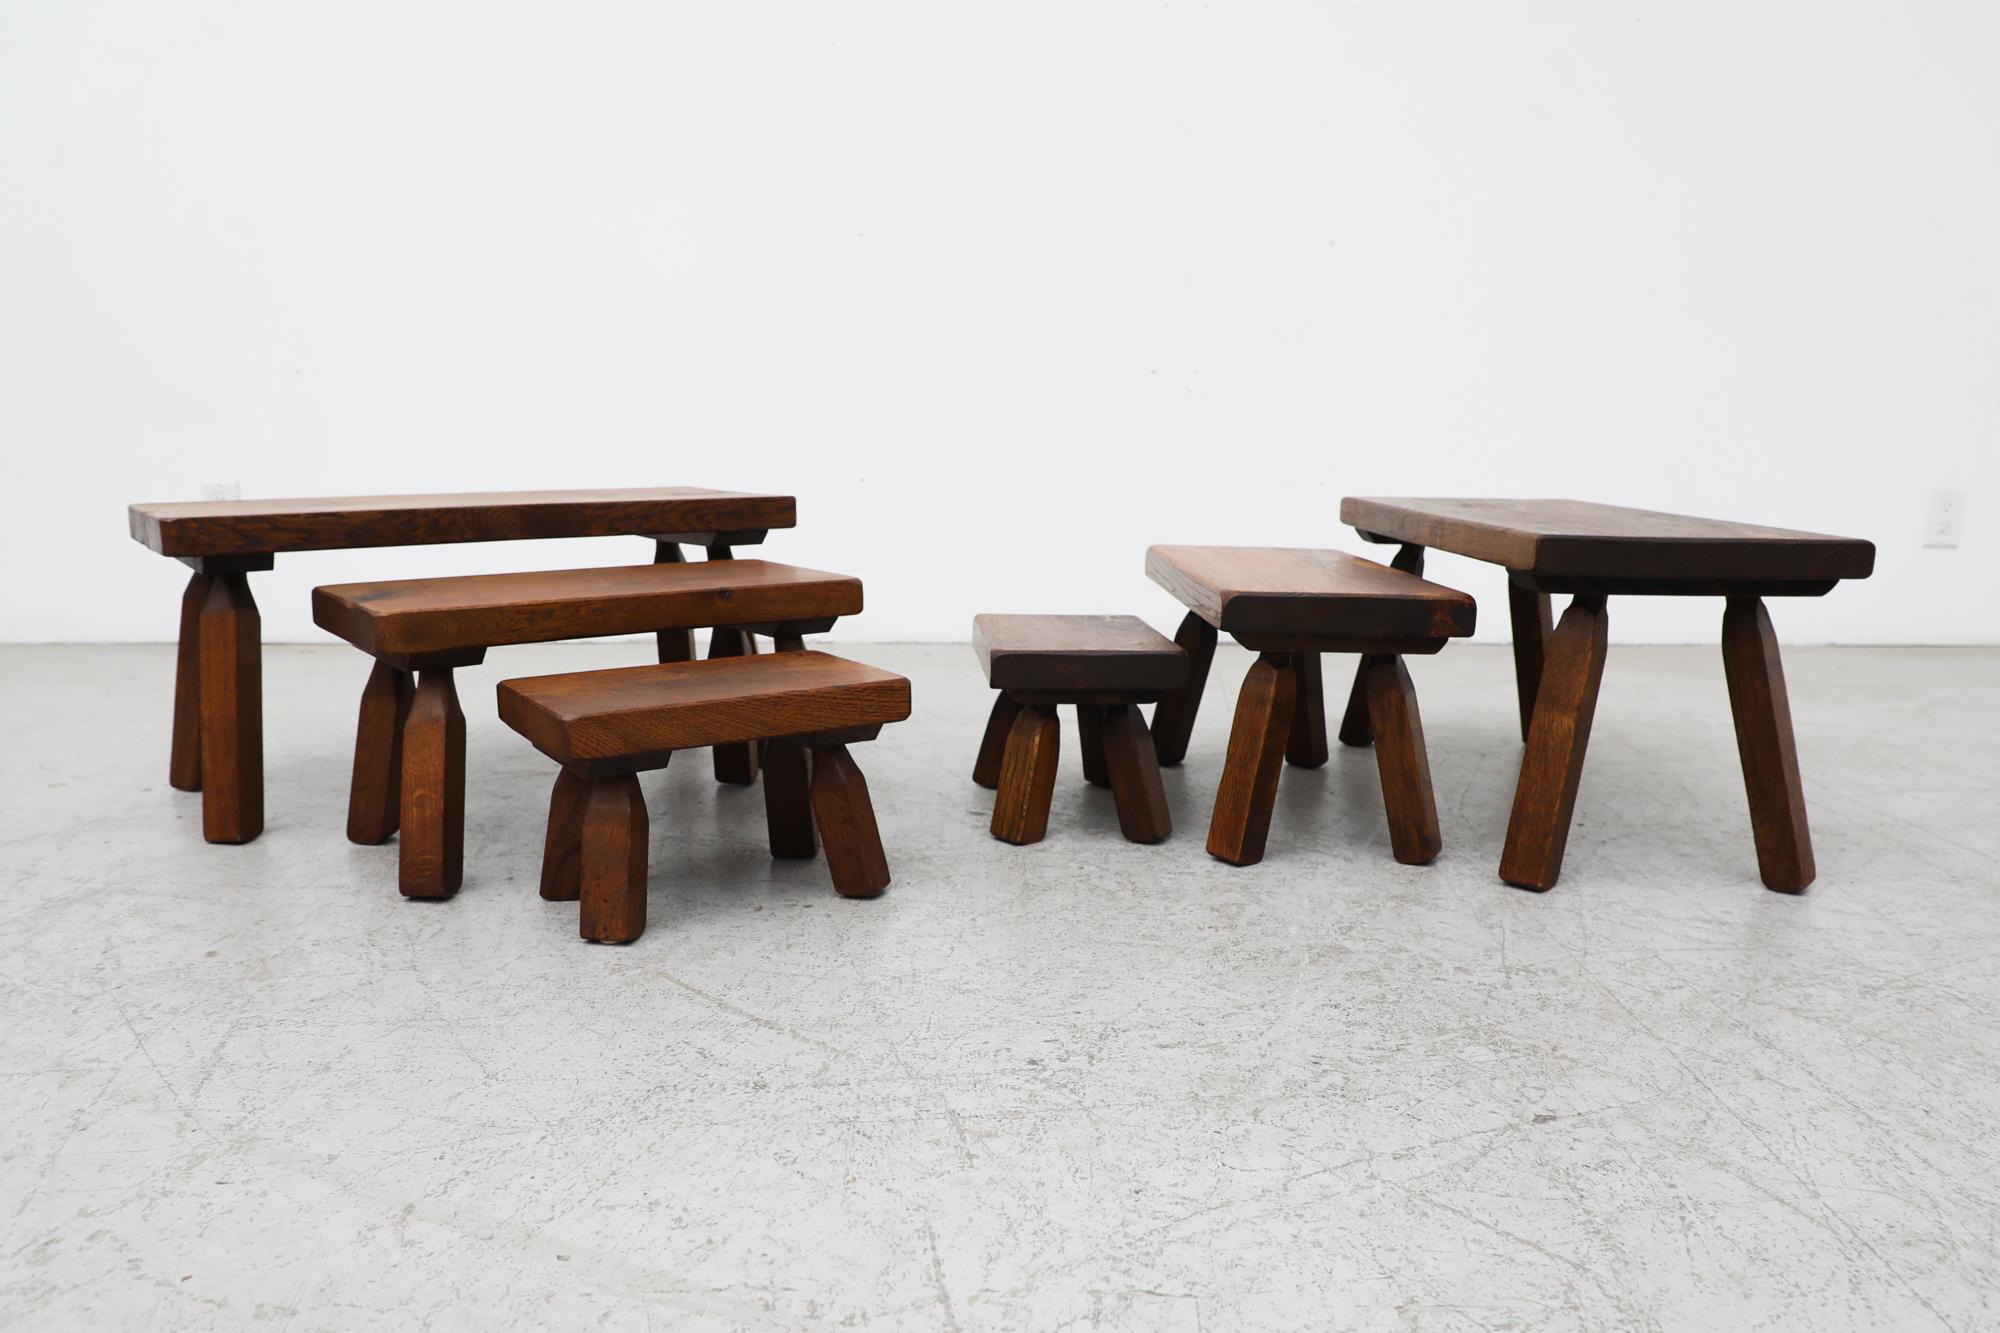 Set of 3 Brutalist dark oak nesting tables with hand waxed finish. The small table measures 12.625 x 7.875 x 8